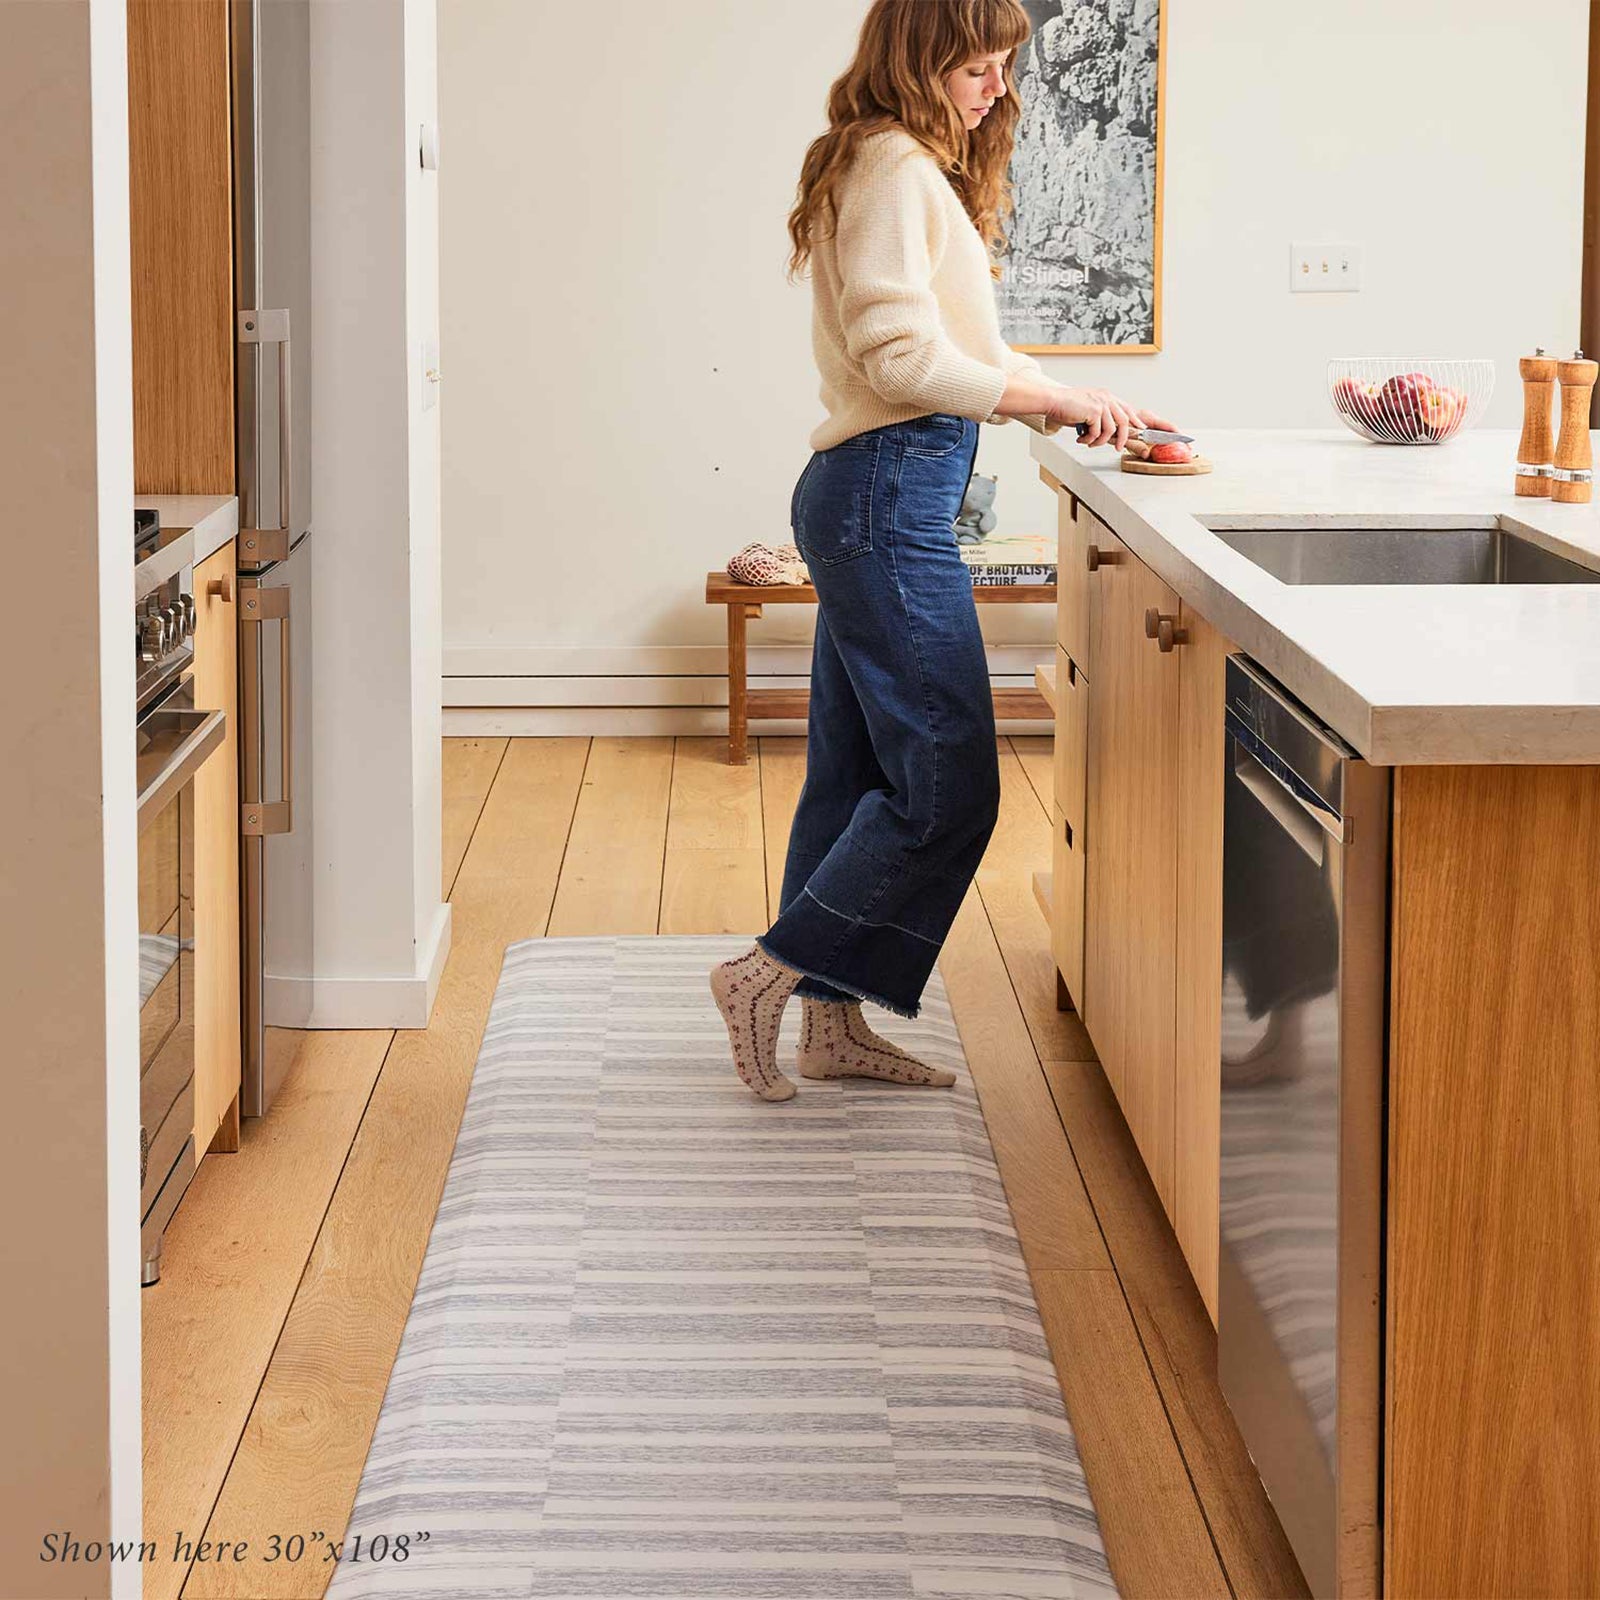 Sutton stripe heather gray and white inverted stripe standing mat shown in light wood tone kitchen with woman standing on size 30x108 cutting up fruit at the counter